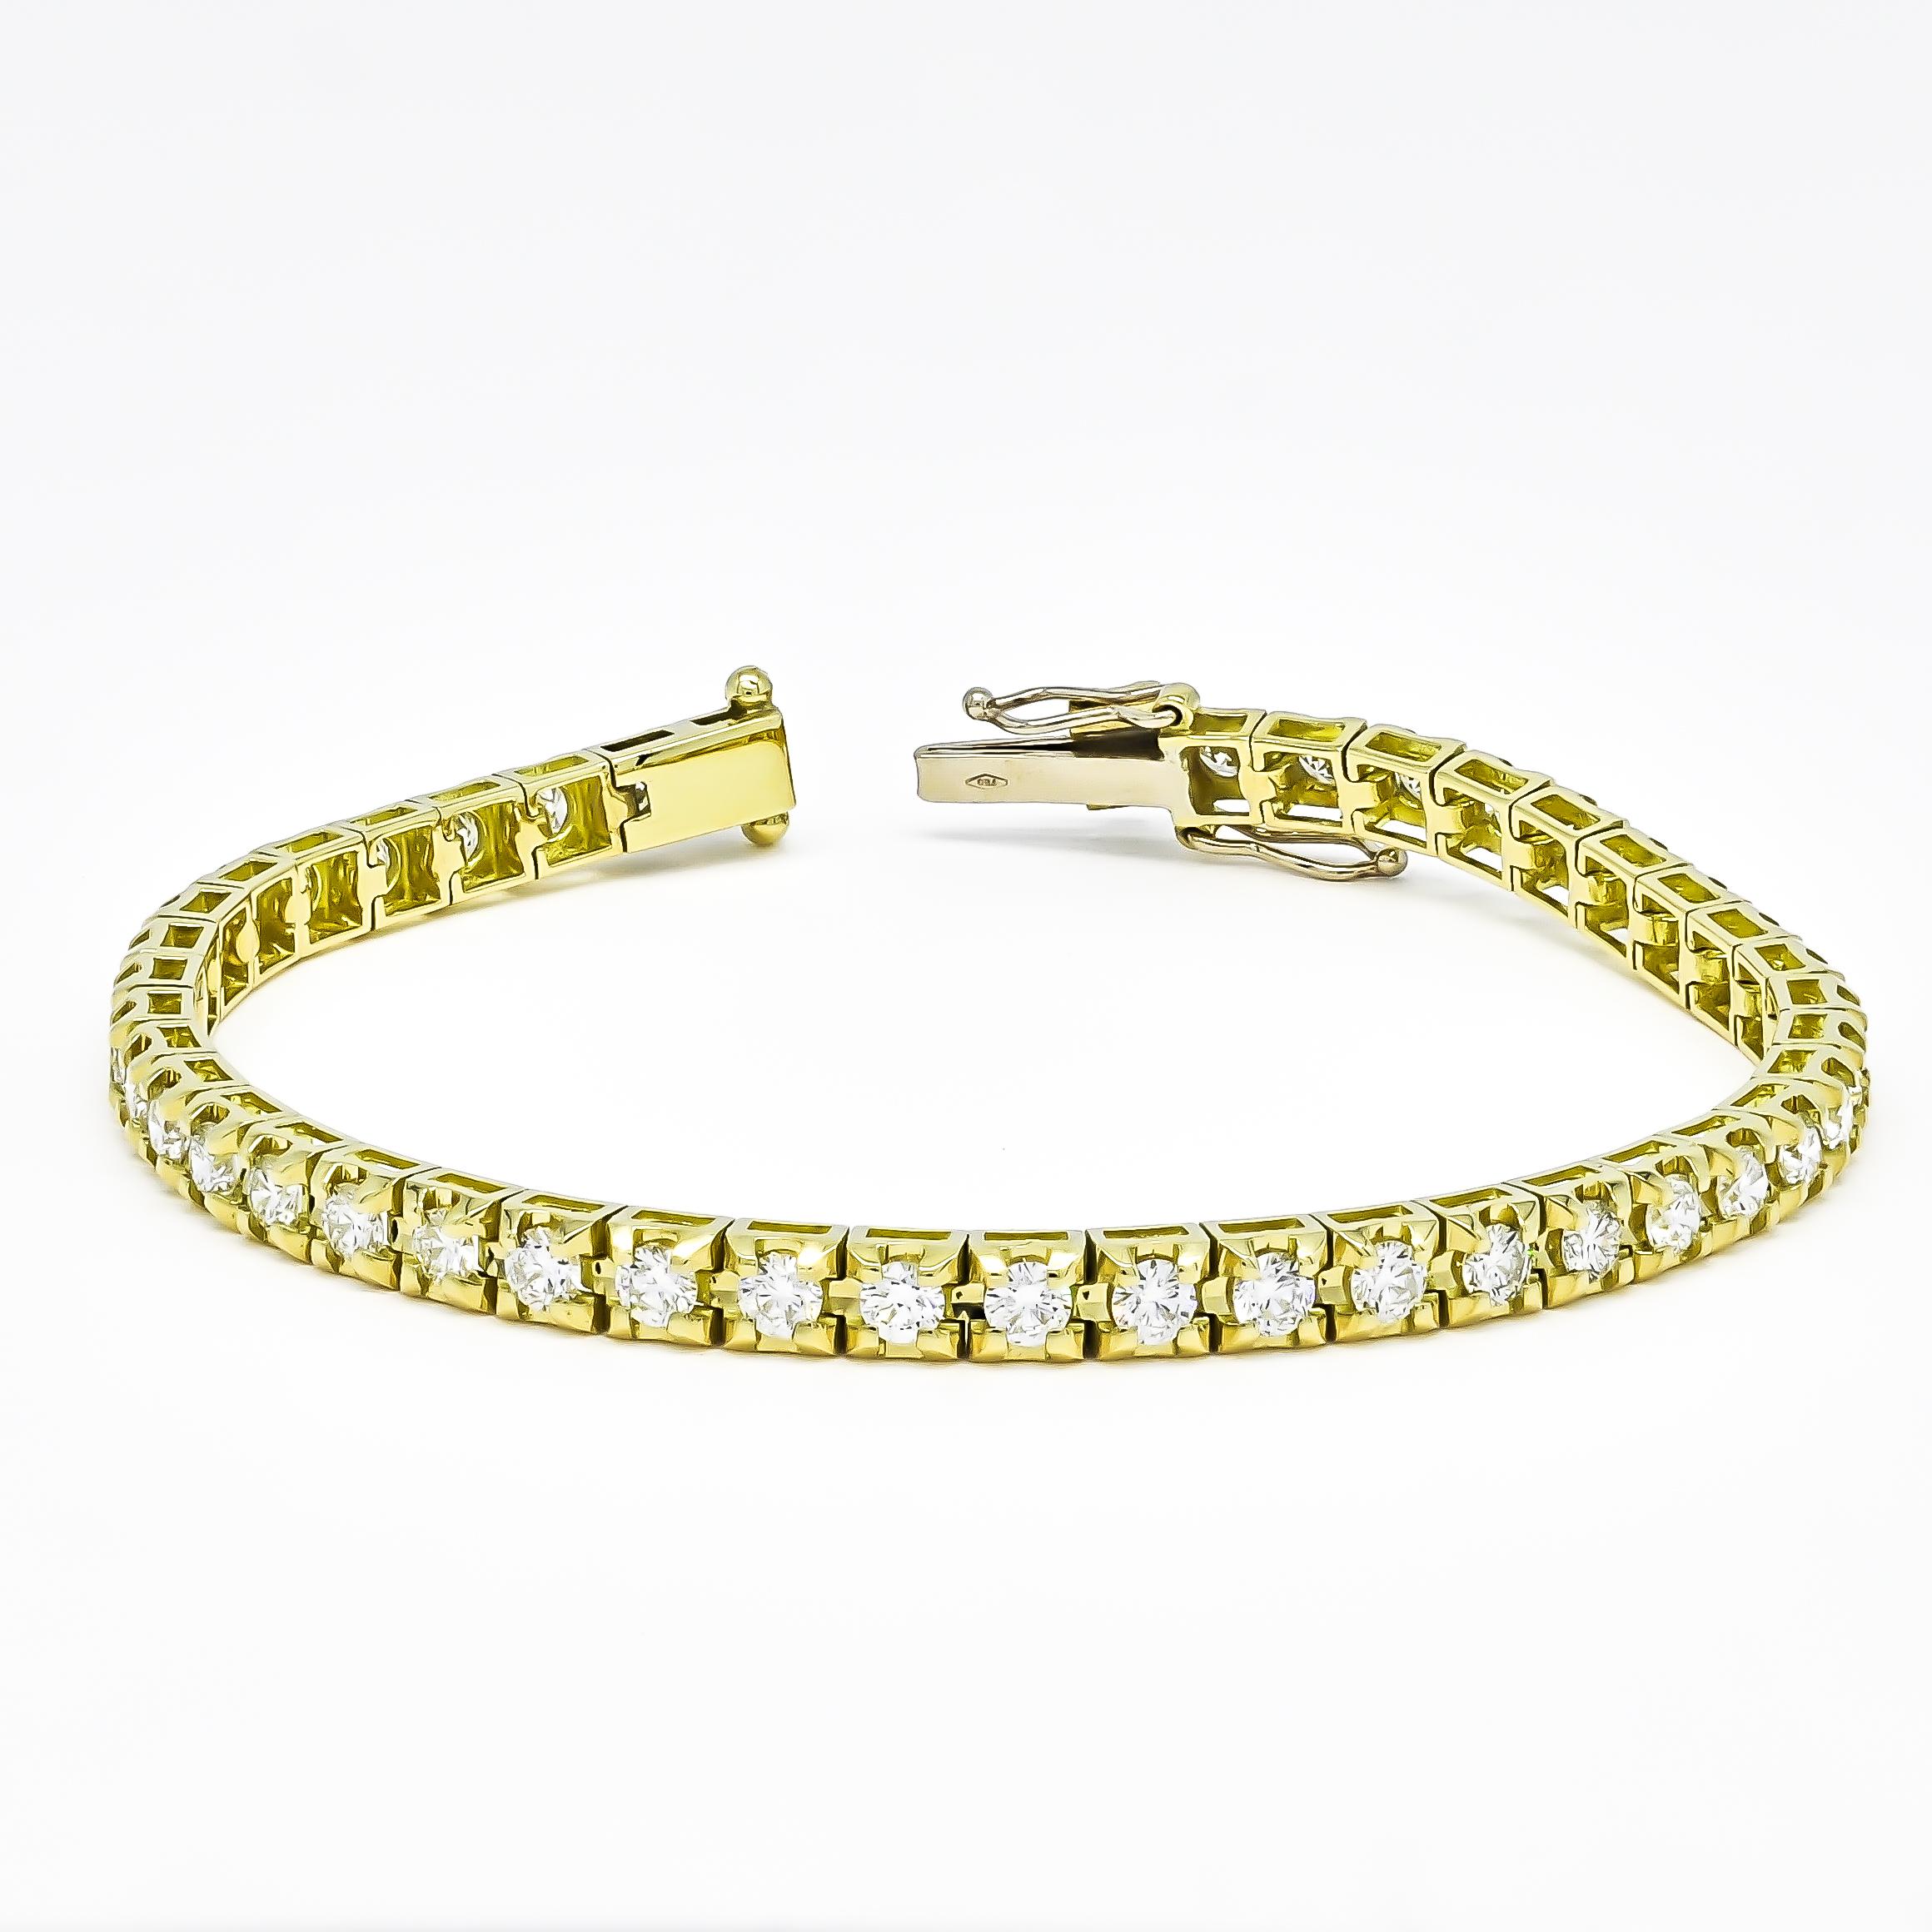 Brilliant Cut Visible 18k Yellow Gold Four Prong Tennis Bracelet in 5.00ct Natural Diamonds For Sale